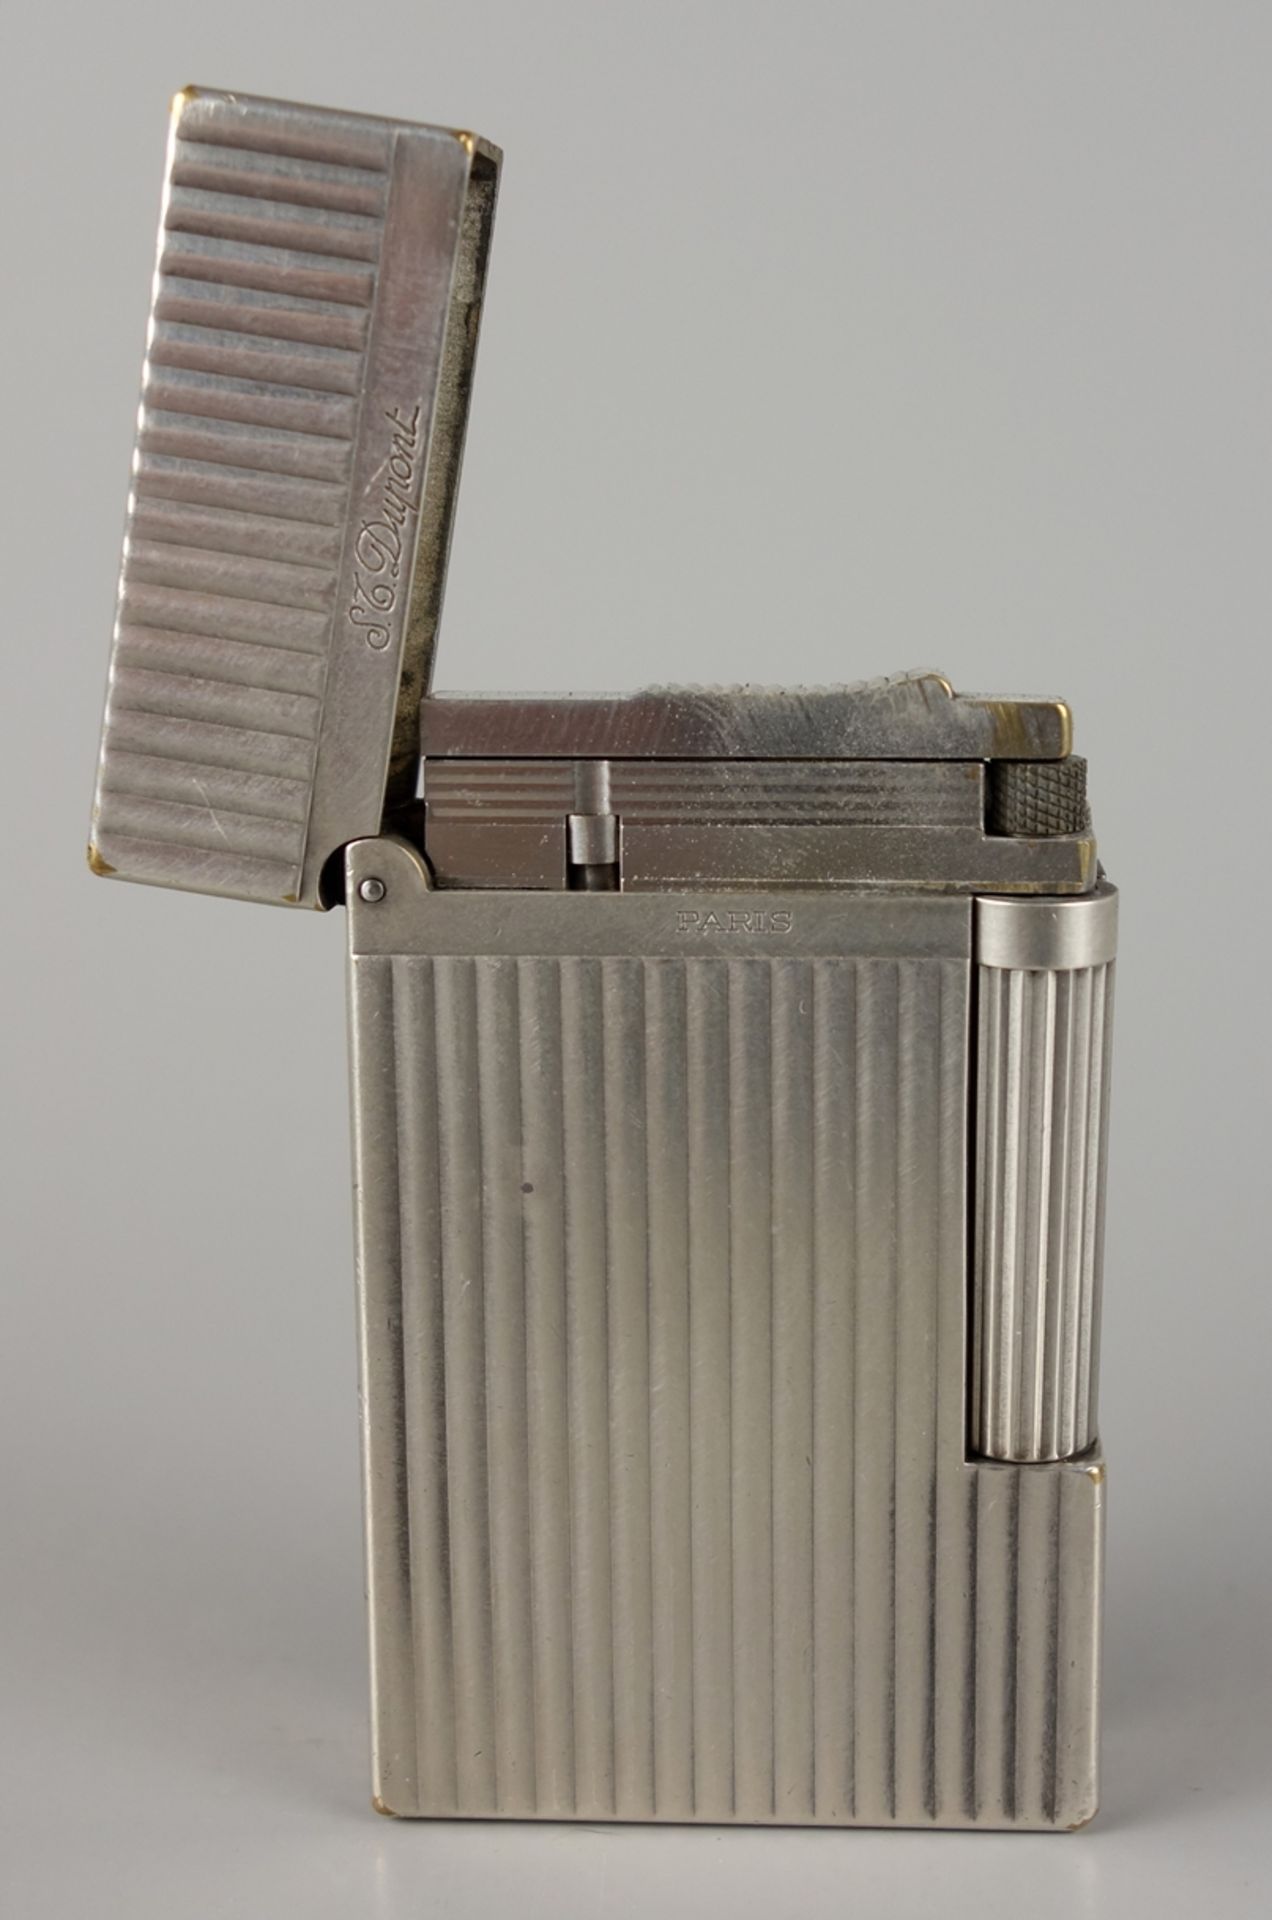 S.T.Dupont lighter, silver plated, France - Image 2 of 3